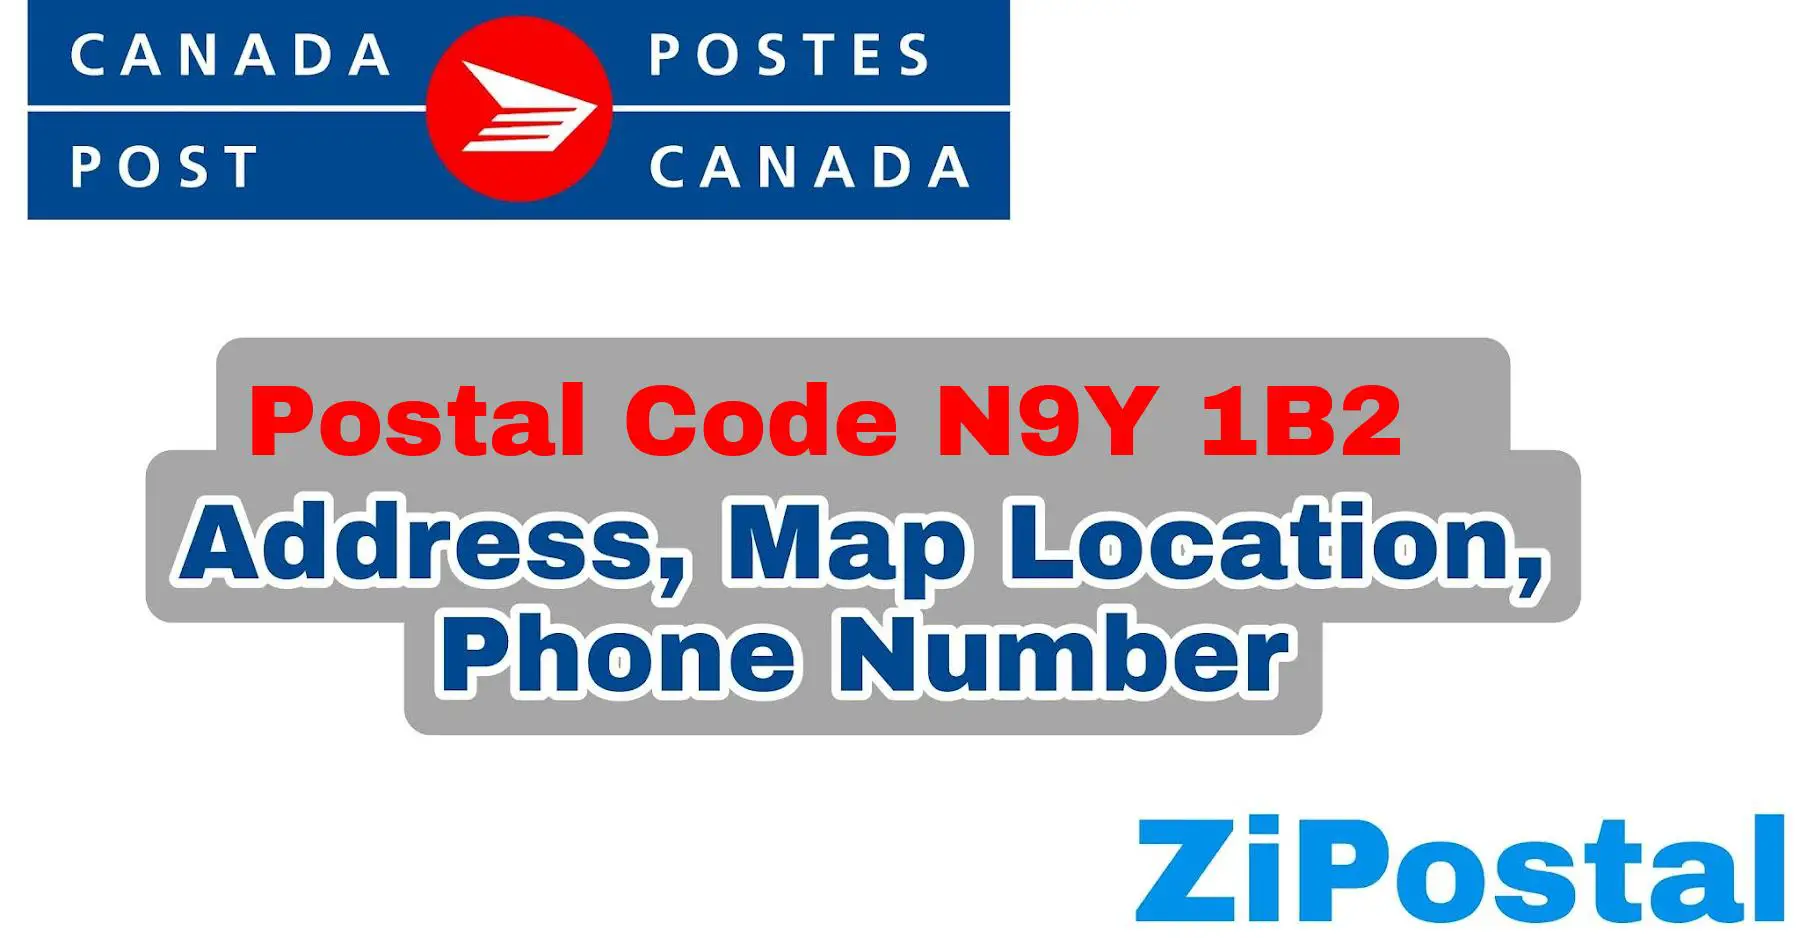 Postal Code N9Y 1B2 Address Map Location and Phone Number